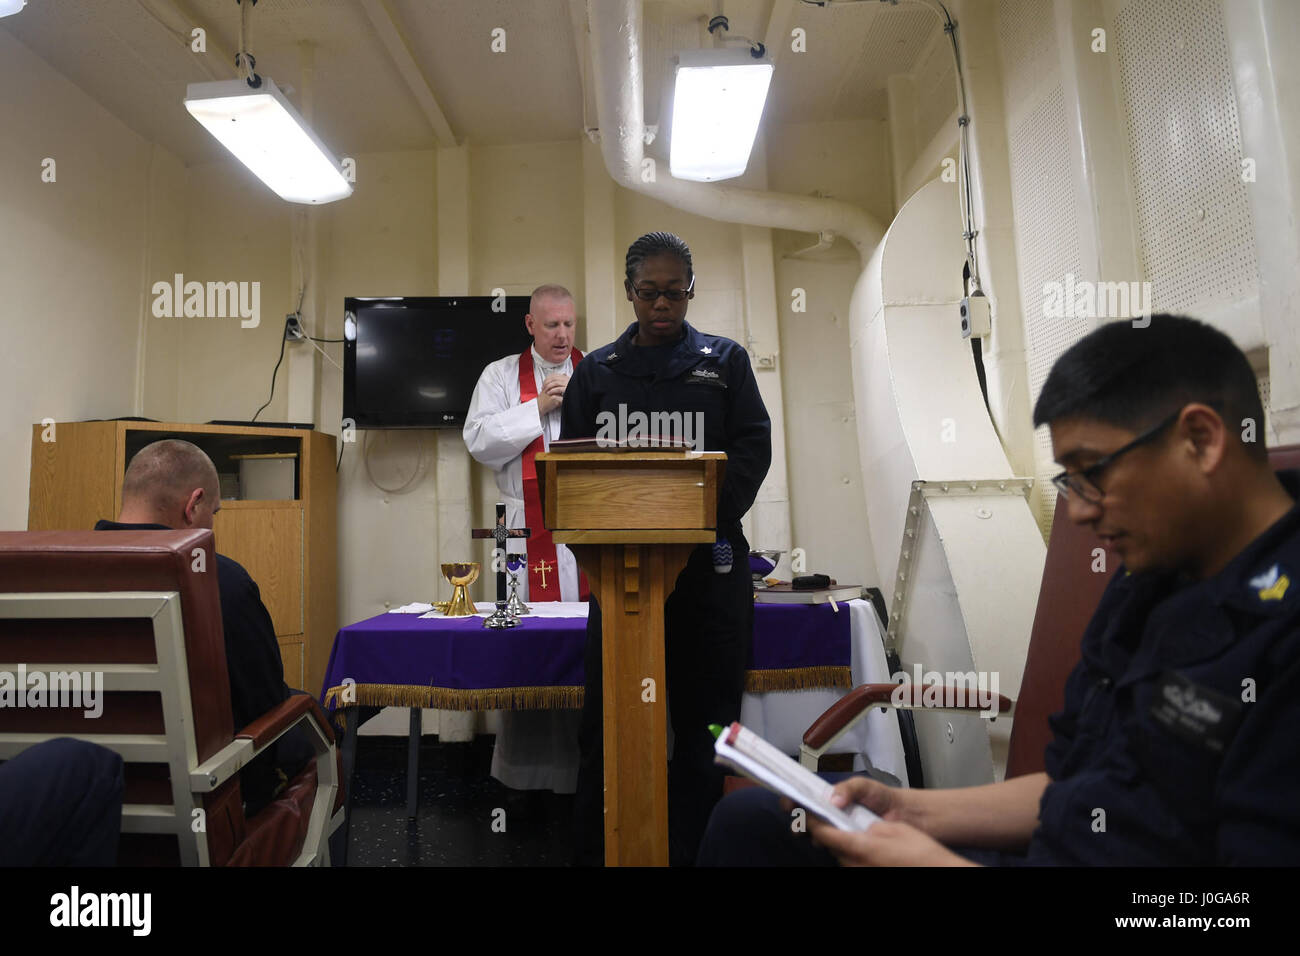 170404-N-ME988-069 5TH FLEET AREA OF OPERATIONS (April 4, 2017) Logistics Specialist 2nd Class Christie J. Martinez, a lay leader aboard the amphibious dock landing ship USS Carter Hall (LSD 50), reads scripture during Roman Catholic mass in celebration of the Eucharist in the ship’s Gator Chapel. The ship is currently deployed with the Bataan Amphibious Ready Group in the U.S. 5th Fleet area of operations in support of maritime security operations designed to reassure allies and partners and preserve the freedom of navigation and the free flow of commerce in the region. (U.S. Navy photo by Ma Stock Photo